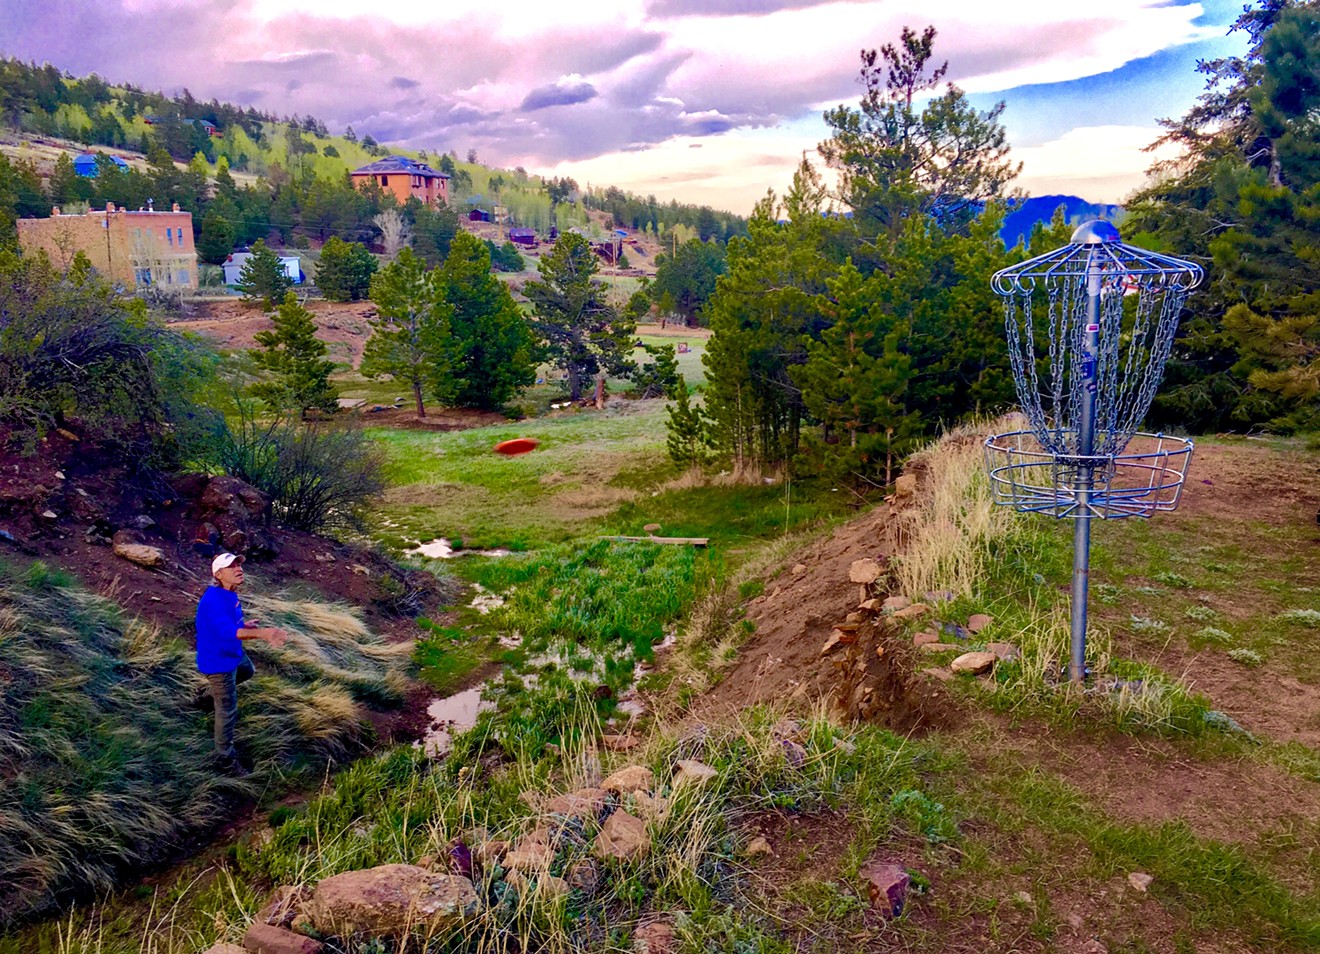 Brian O'Donnell on the course at Ghost Town Disc Golf.